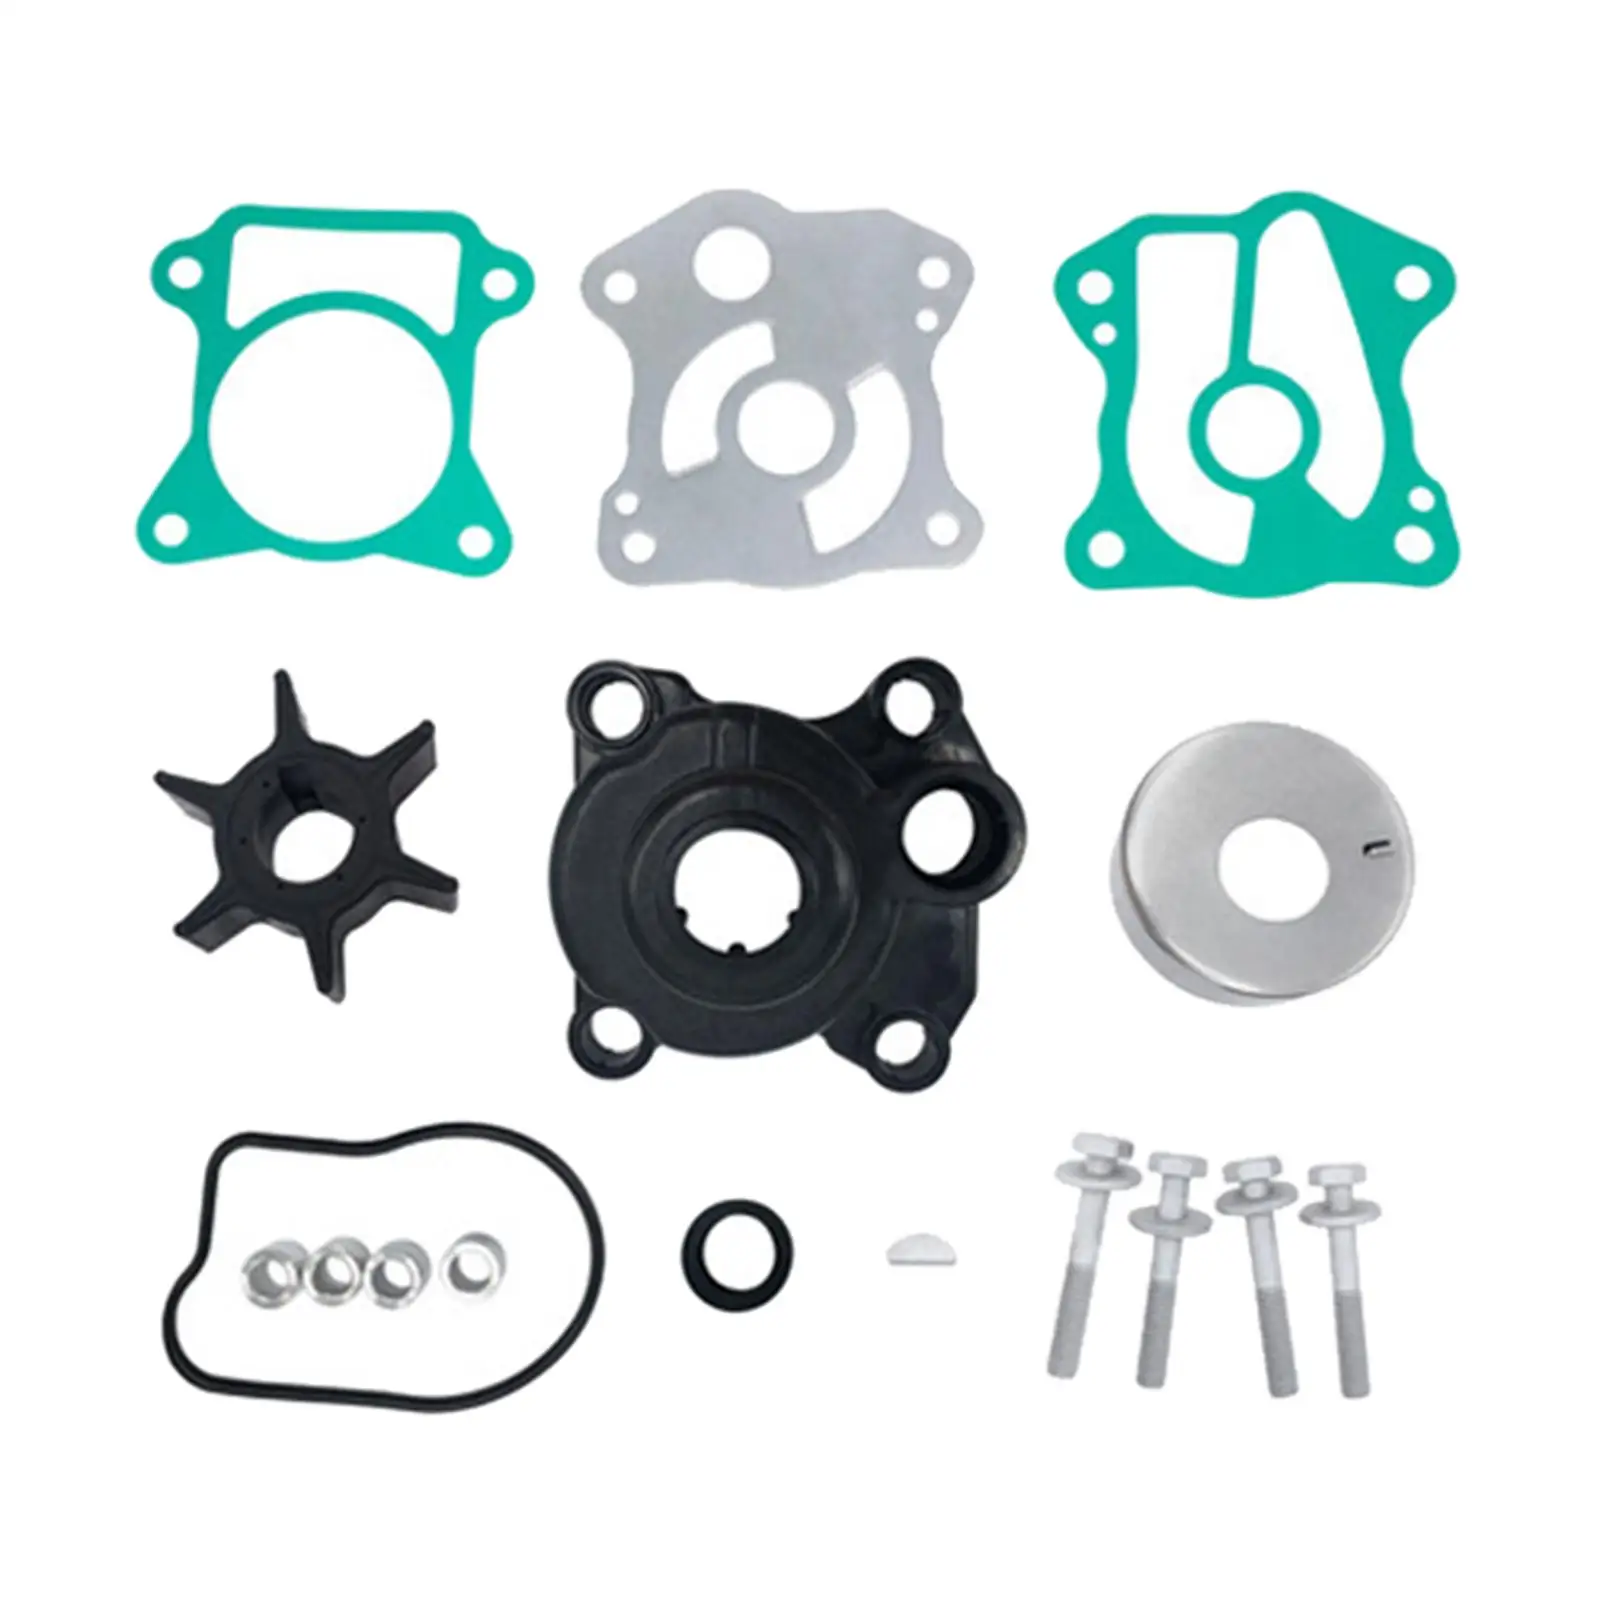 Water Pump Impeller Repair Kit for Honda BF25A BF25D BF30A BF30D 06193-ZV7-010 Outboard Engines